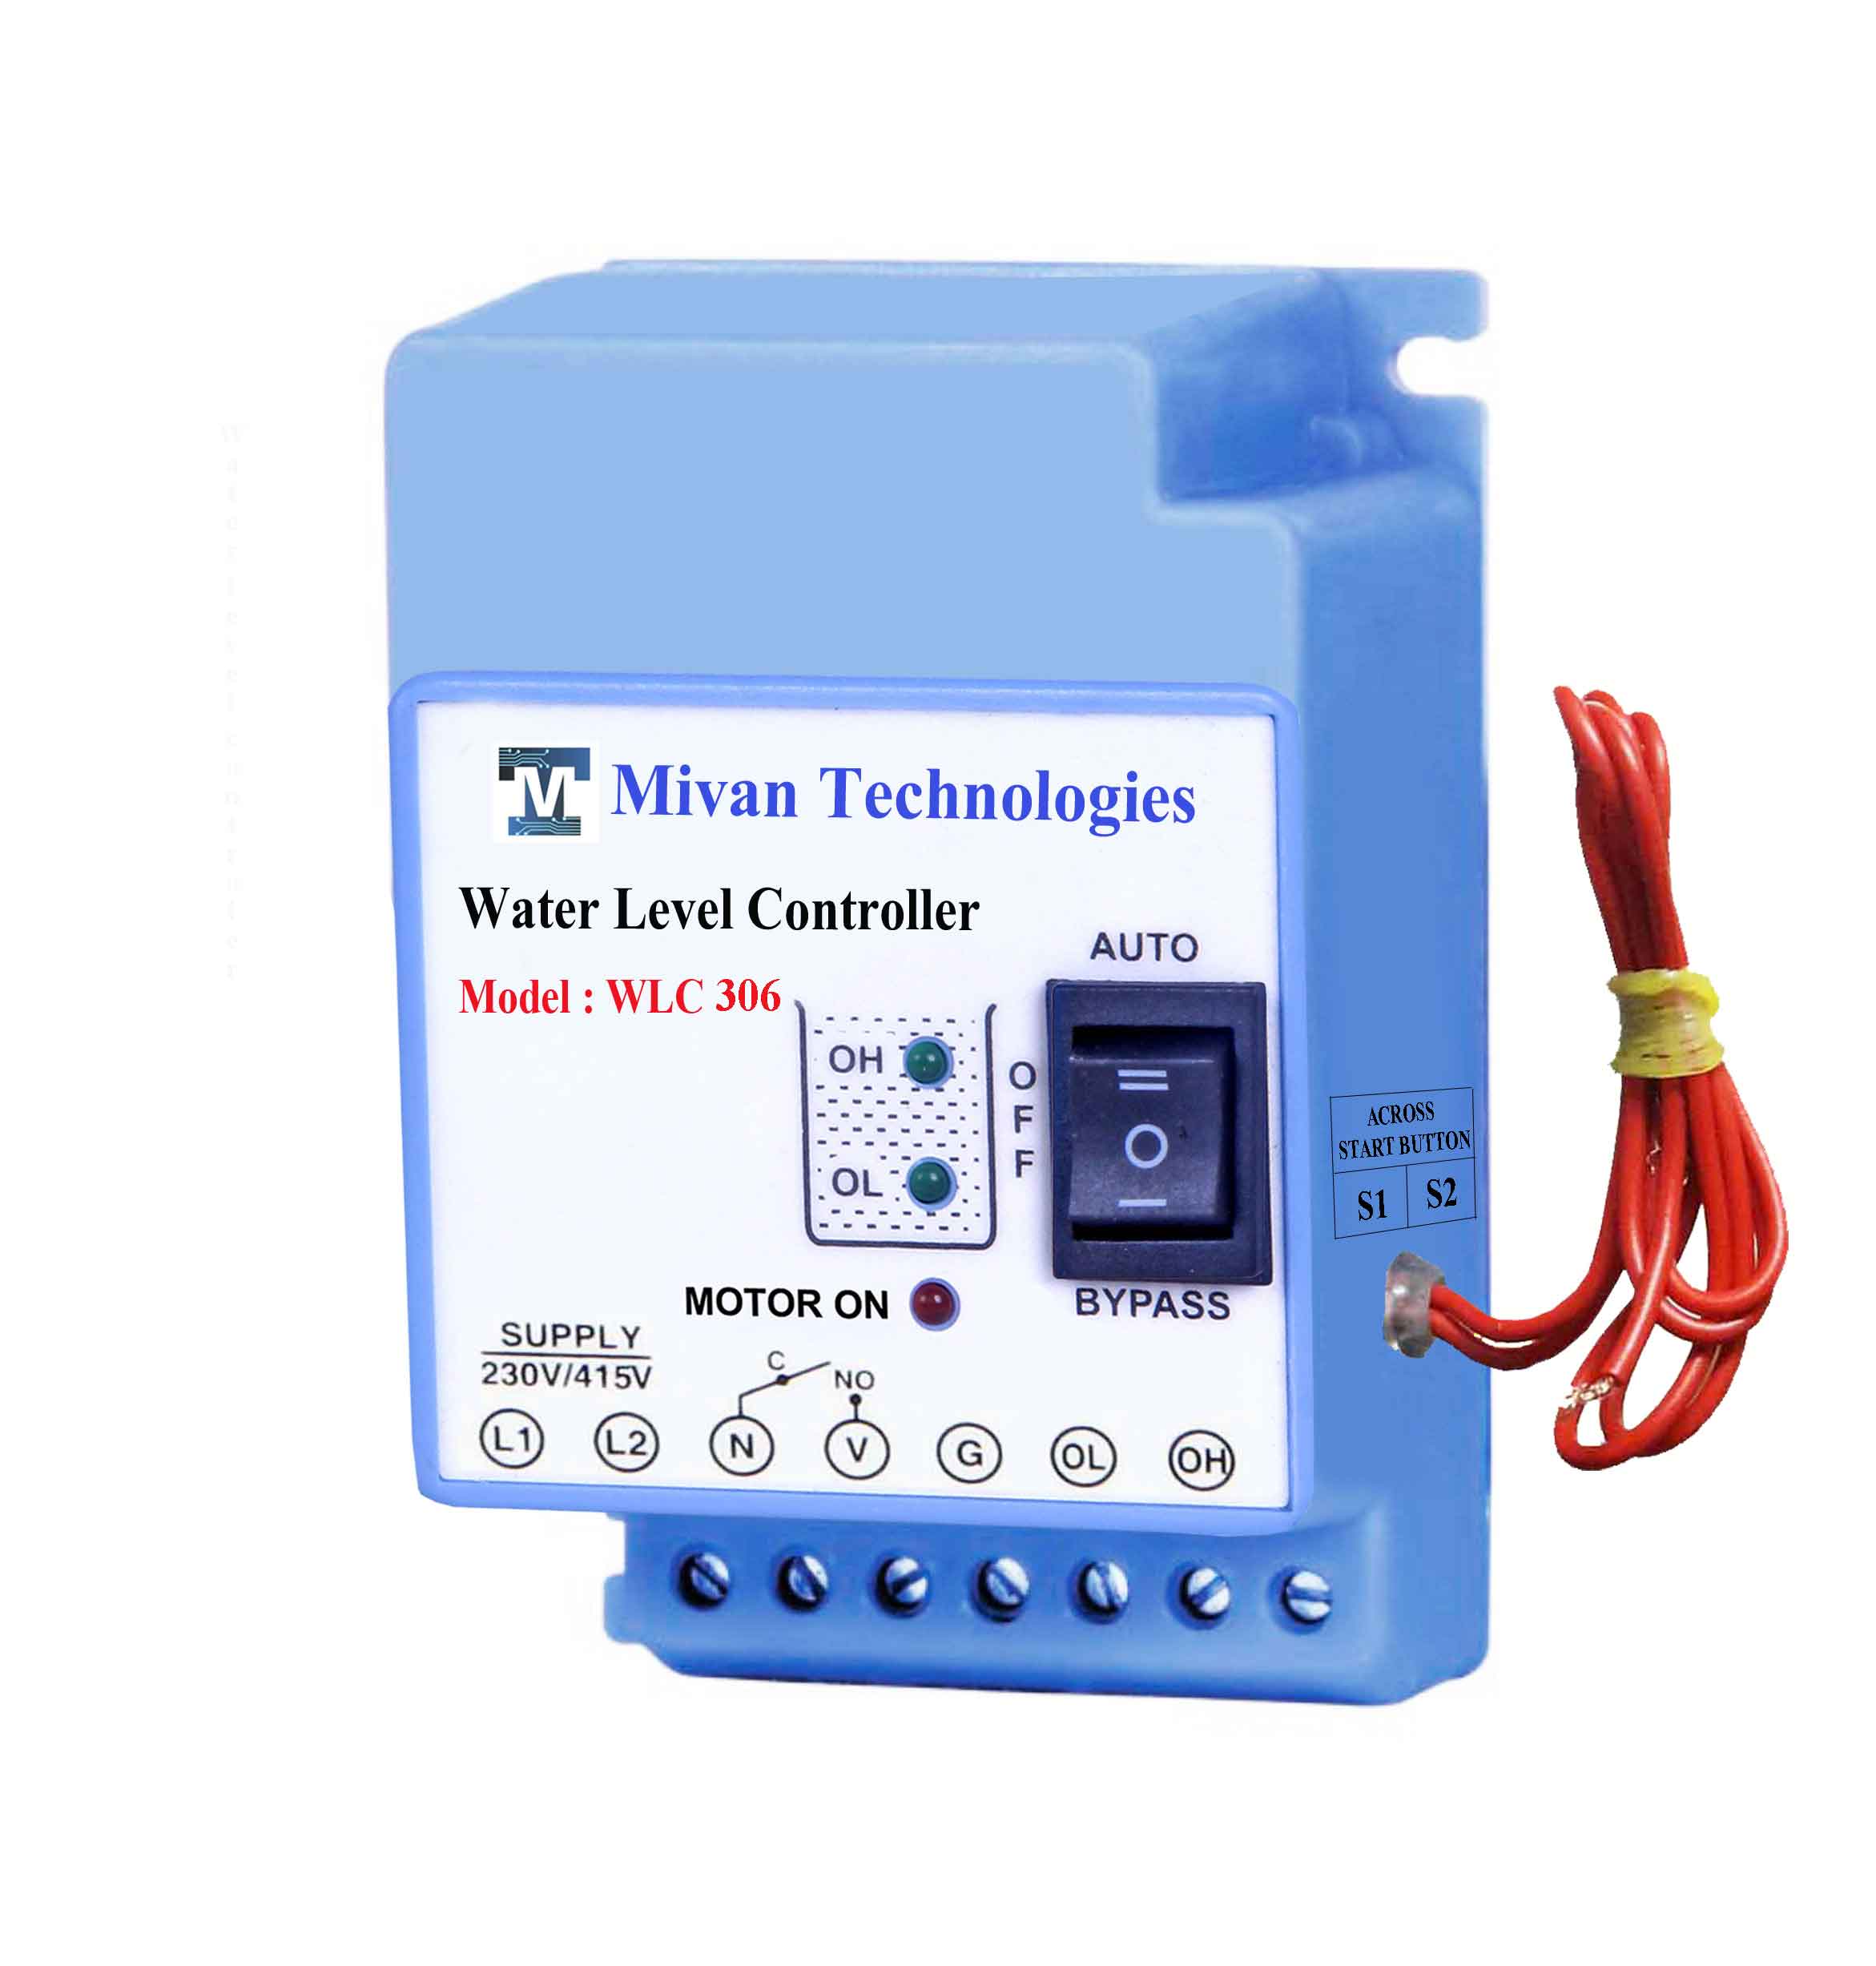 WLC 306 Water level controller for 3 phase motor and submersible pump with 3 sensor